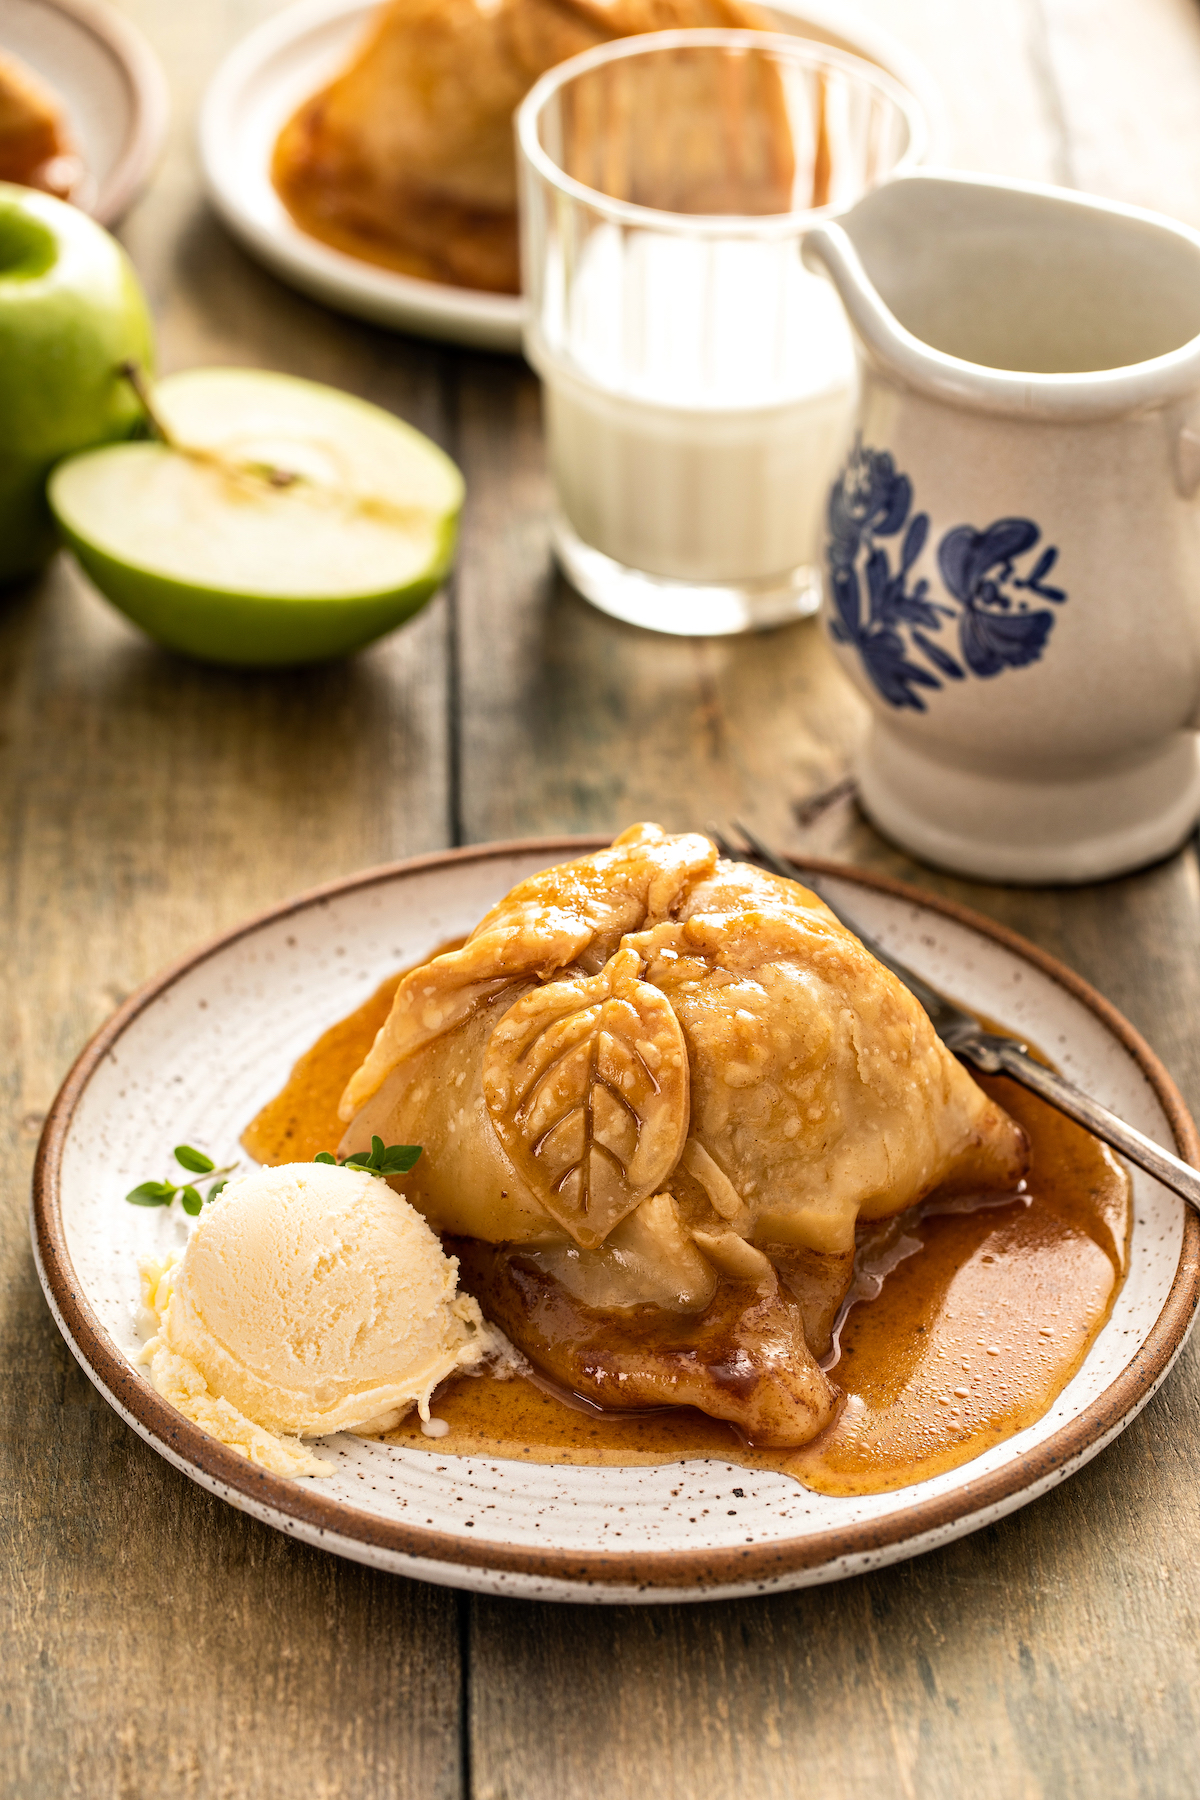 An apple dumpling with sauce on a small plate.